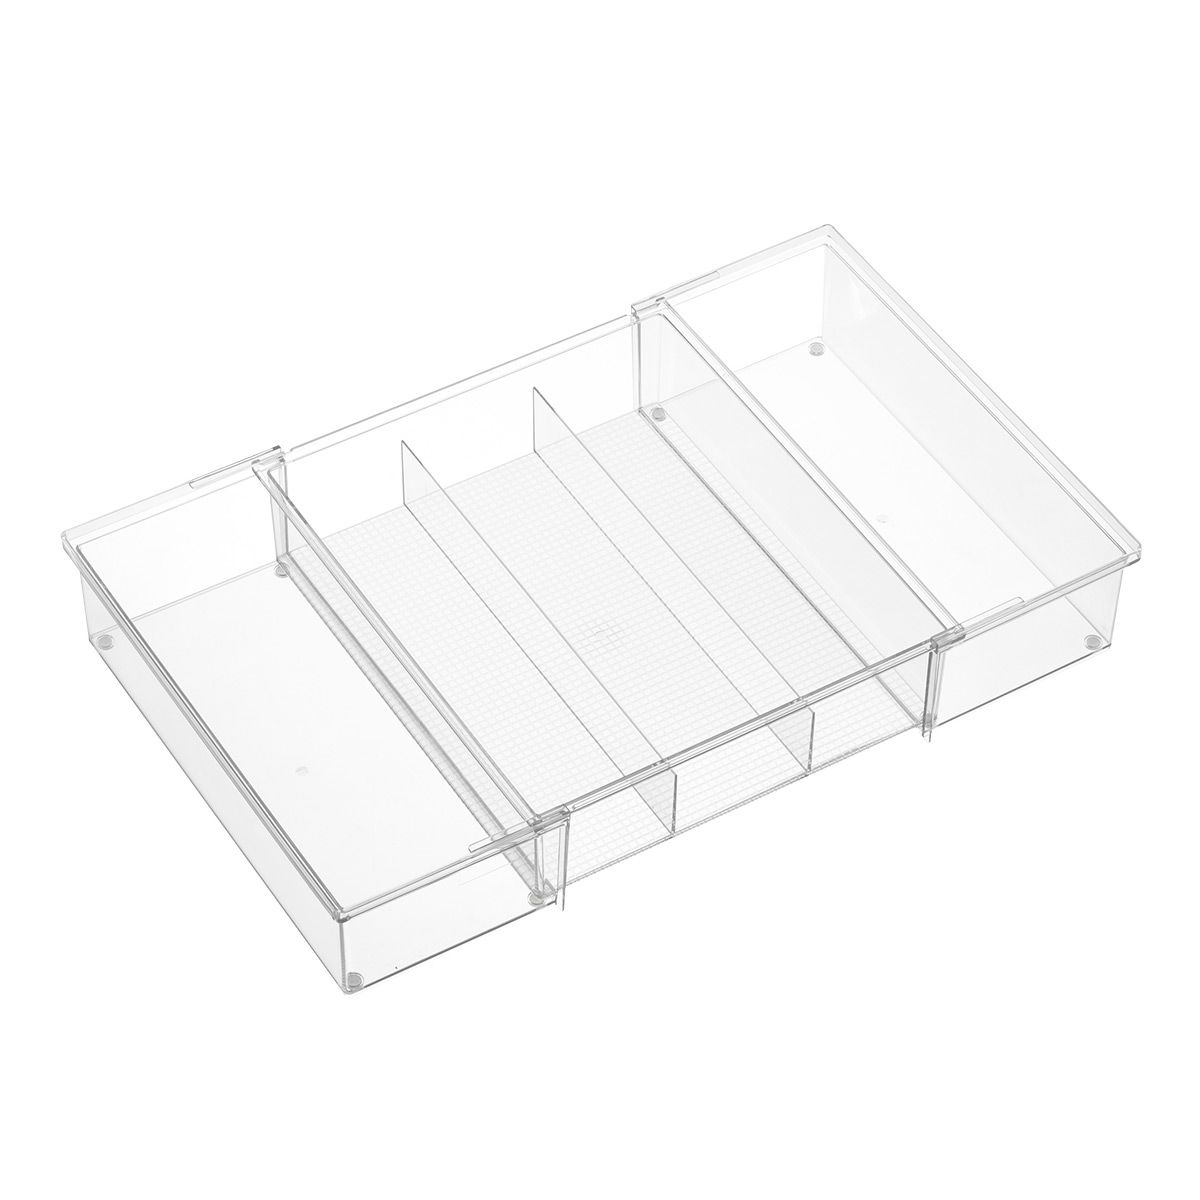 Everything Organizer Closet Drawer Organizers Collection | The Container Store